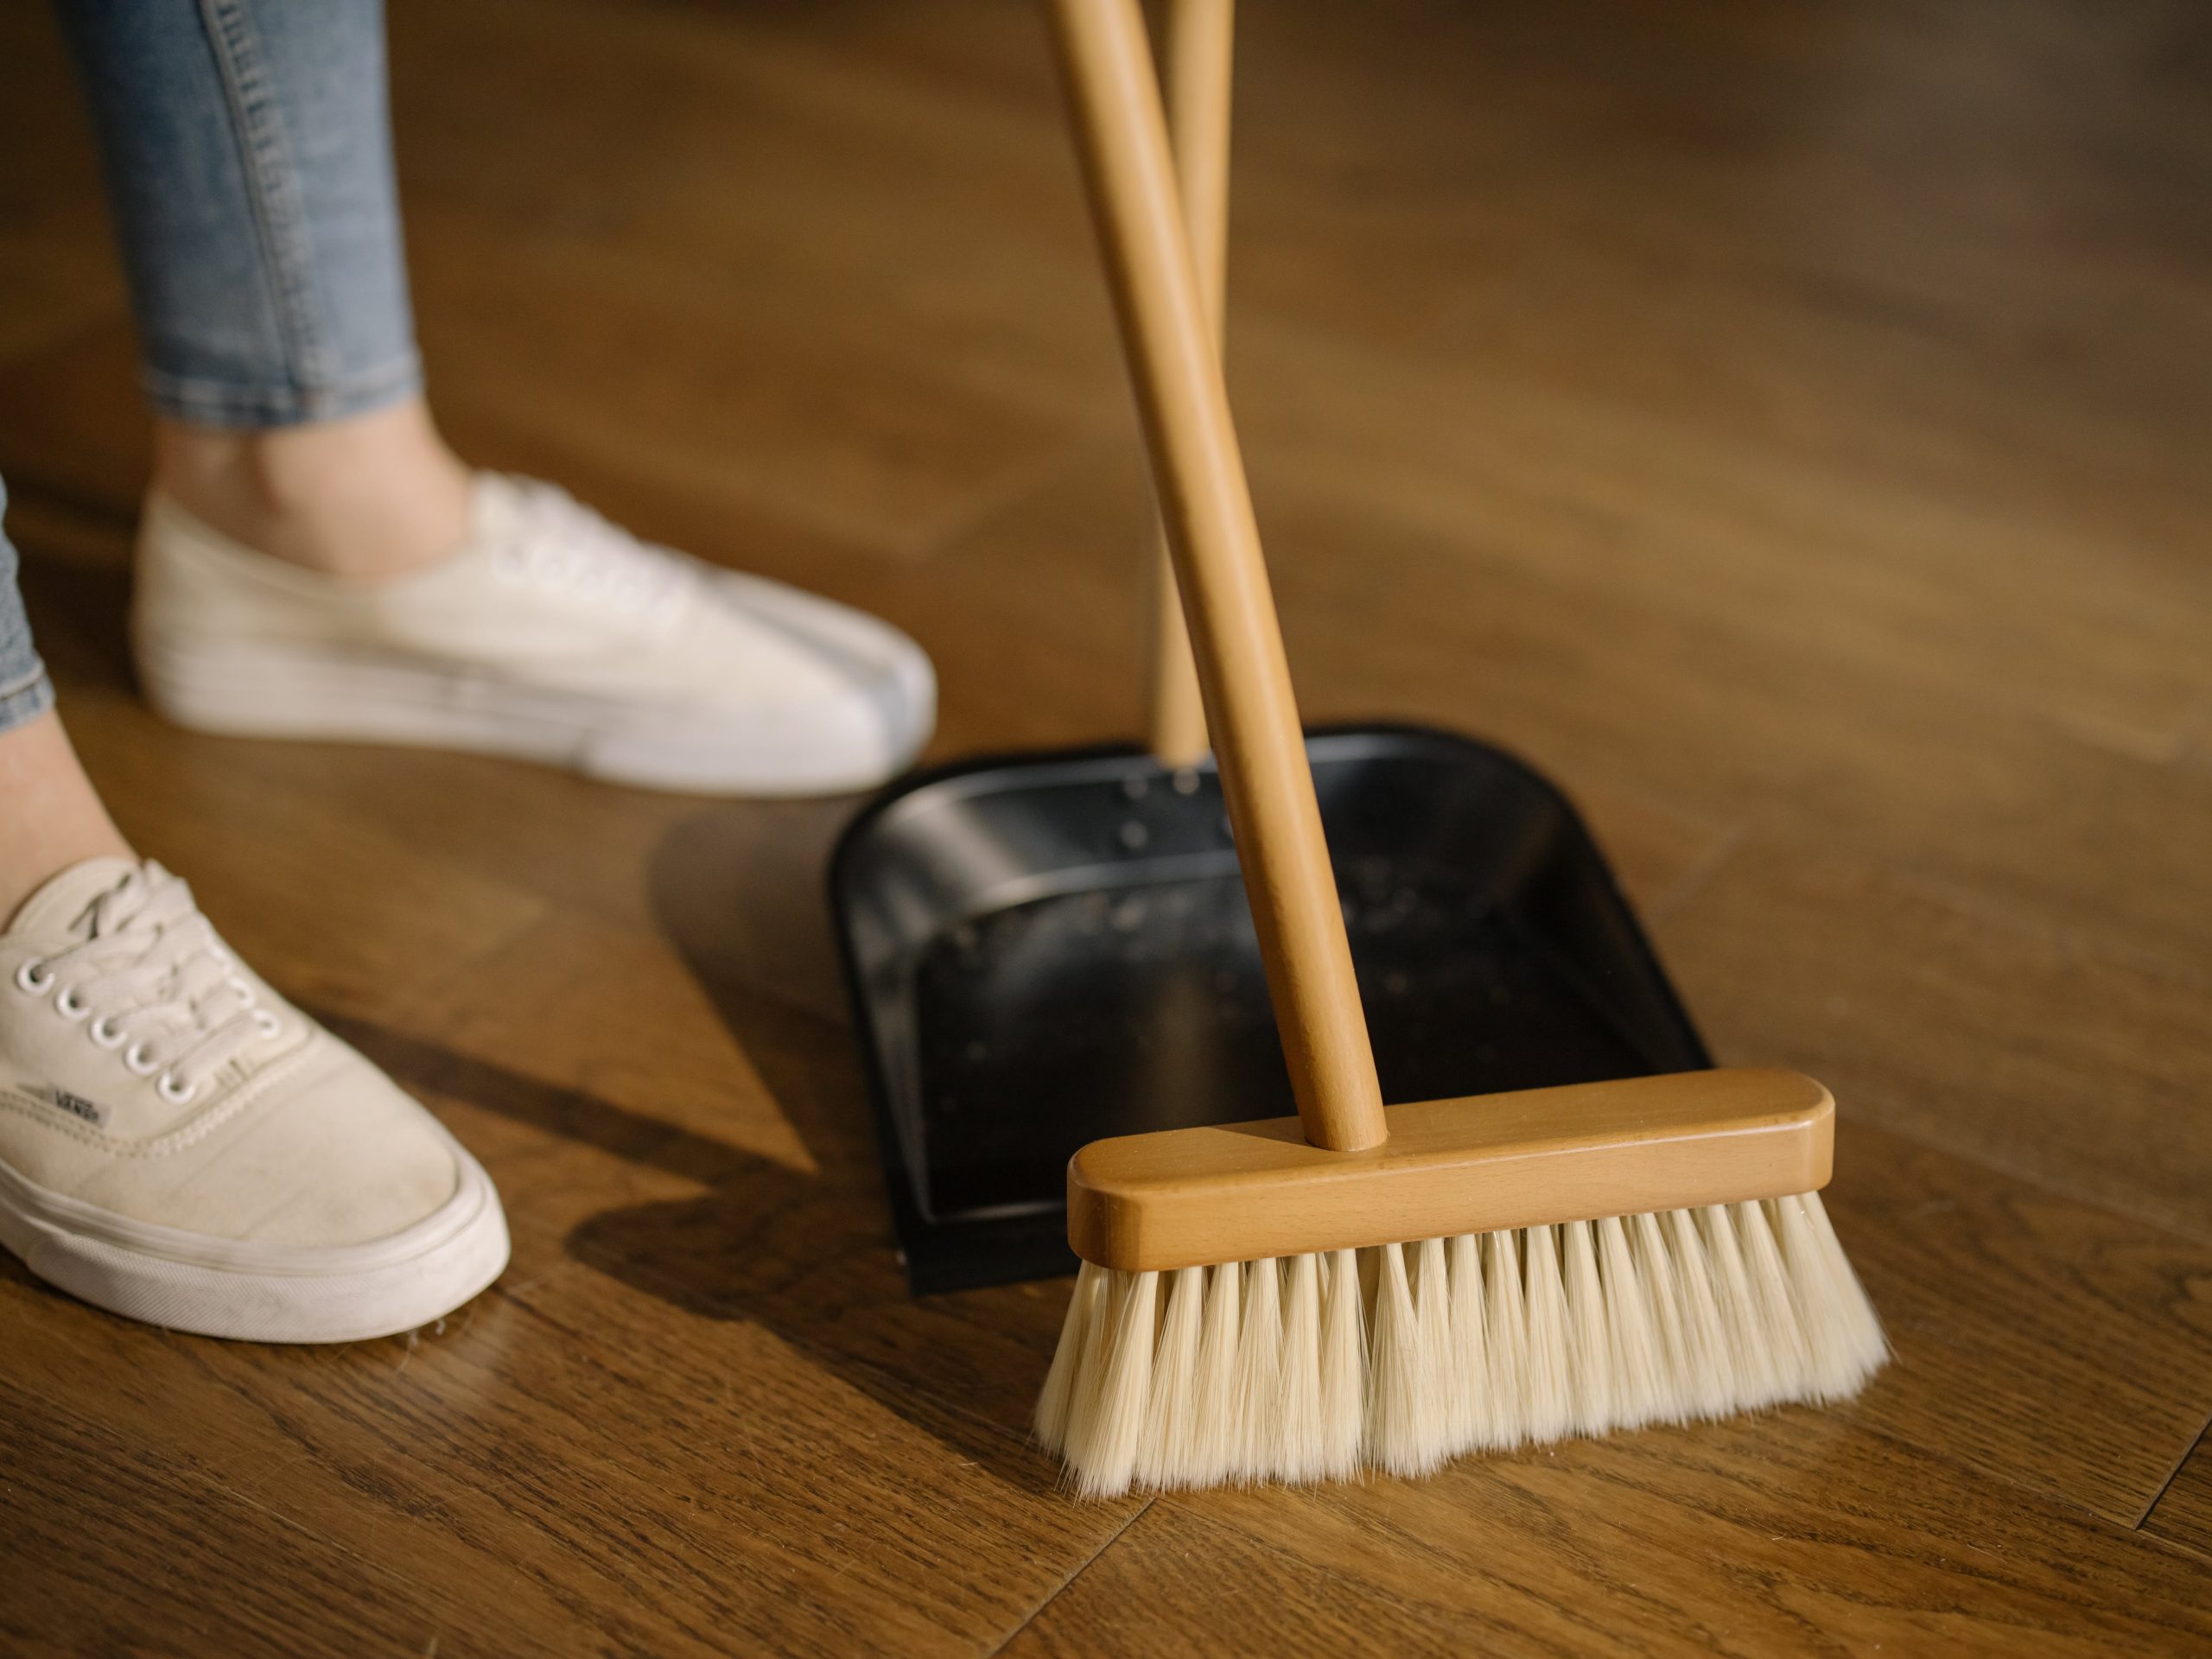 How to deep clean your property before renting it